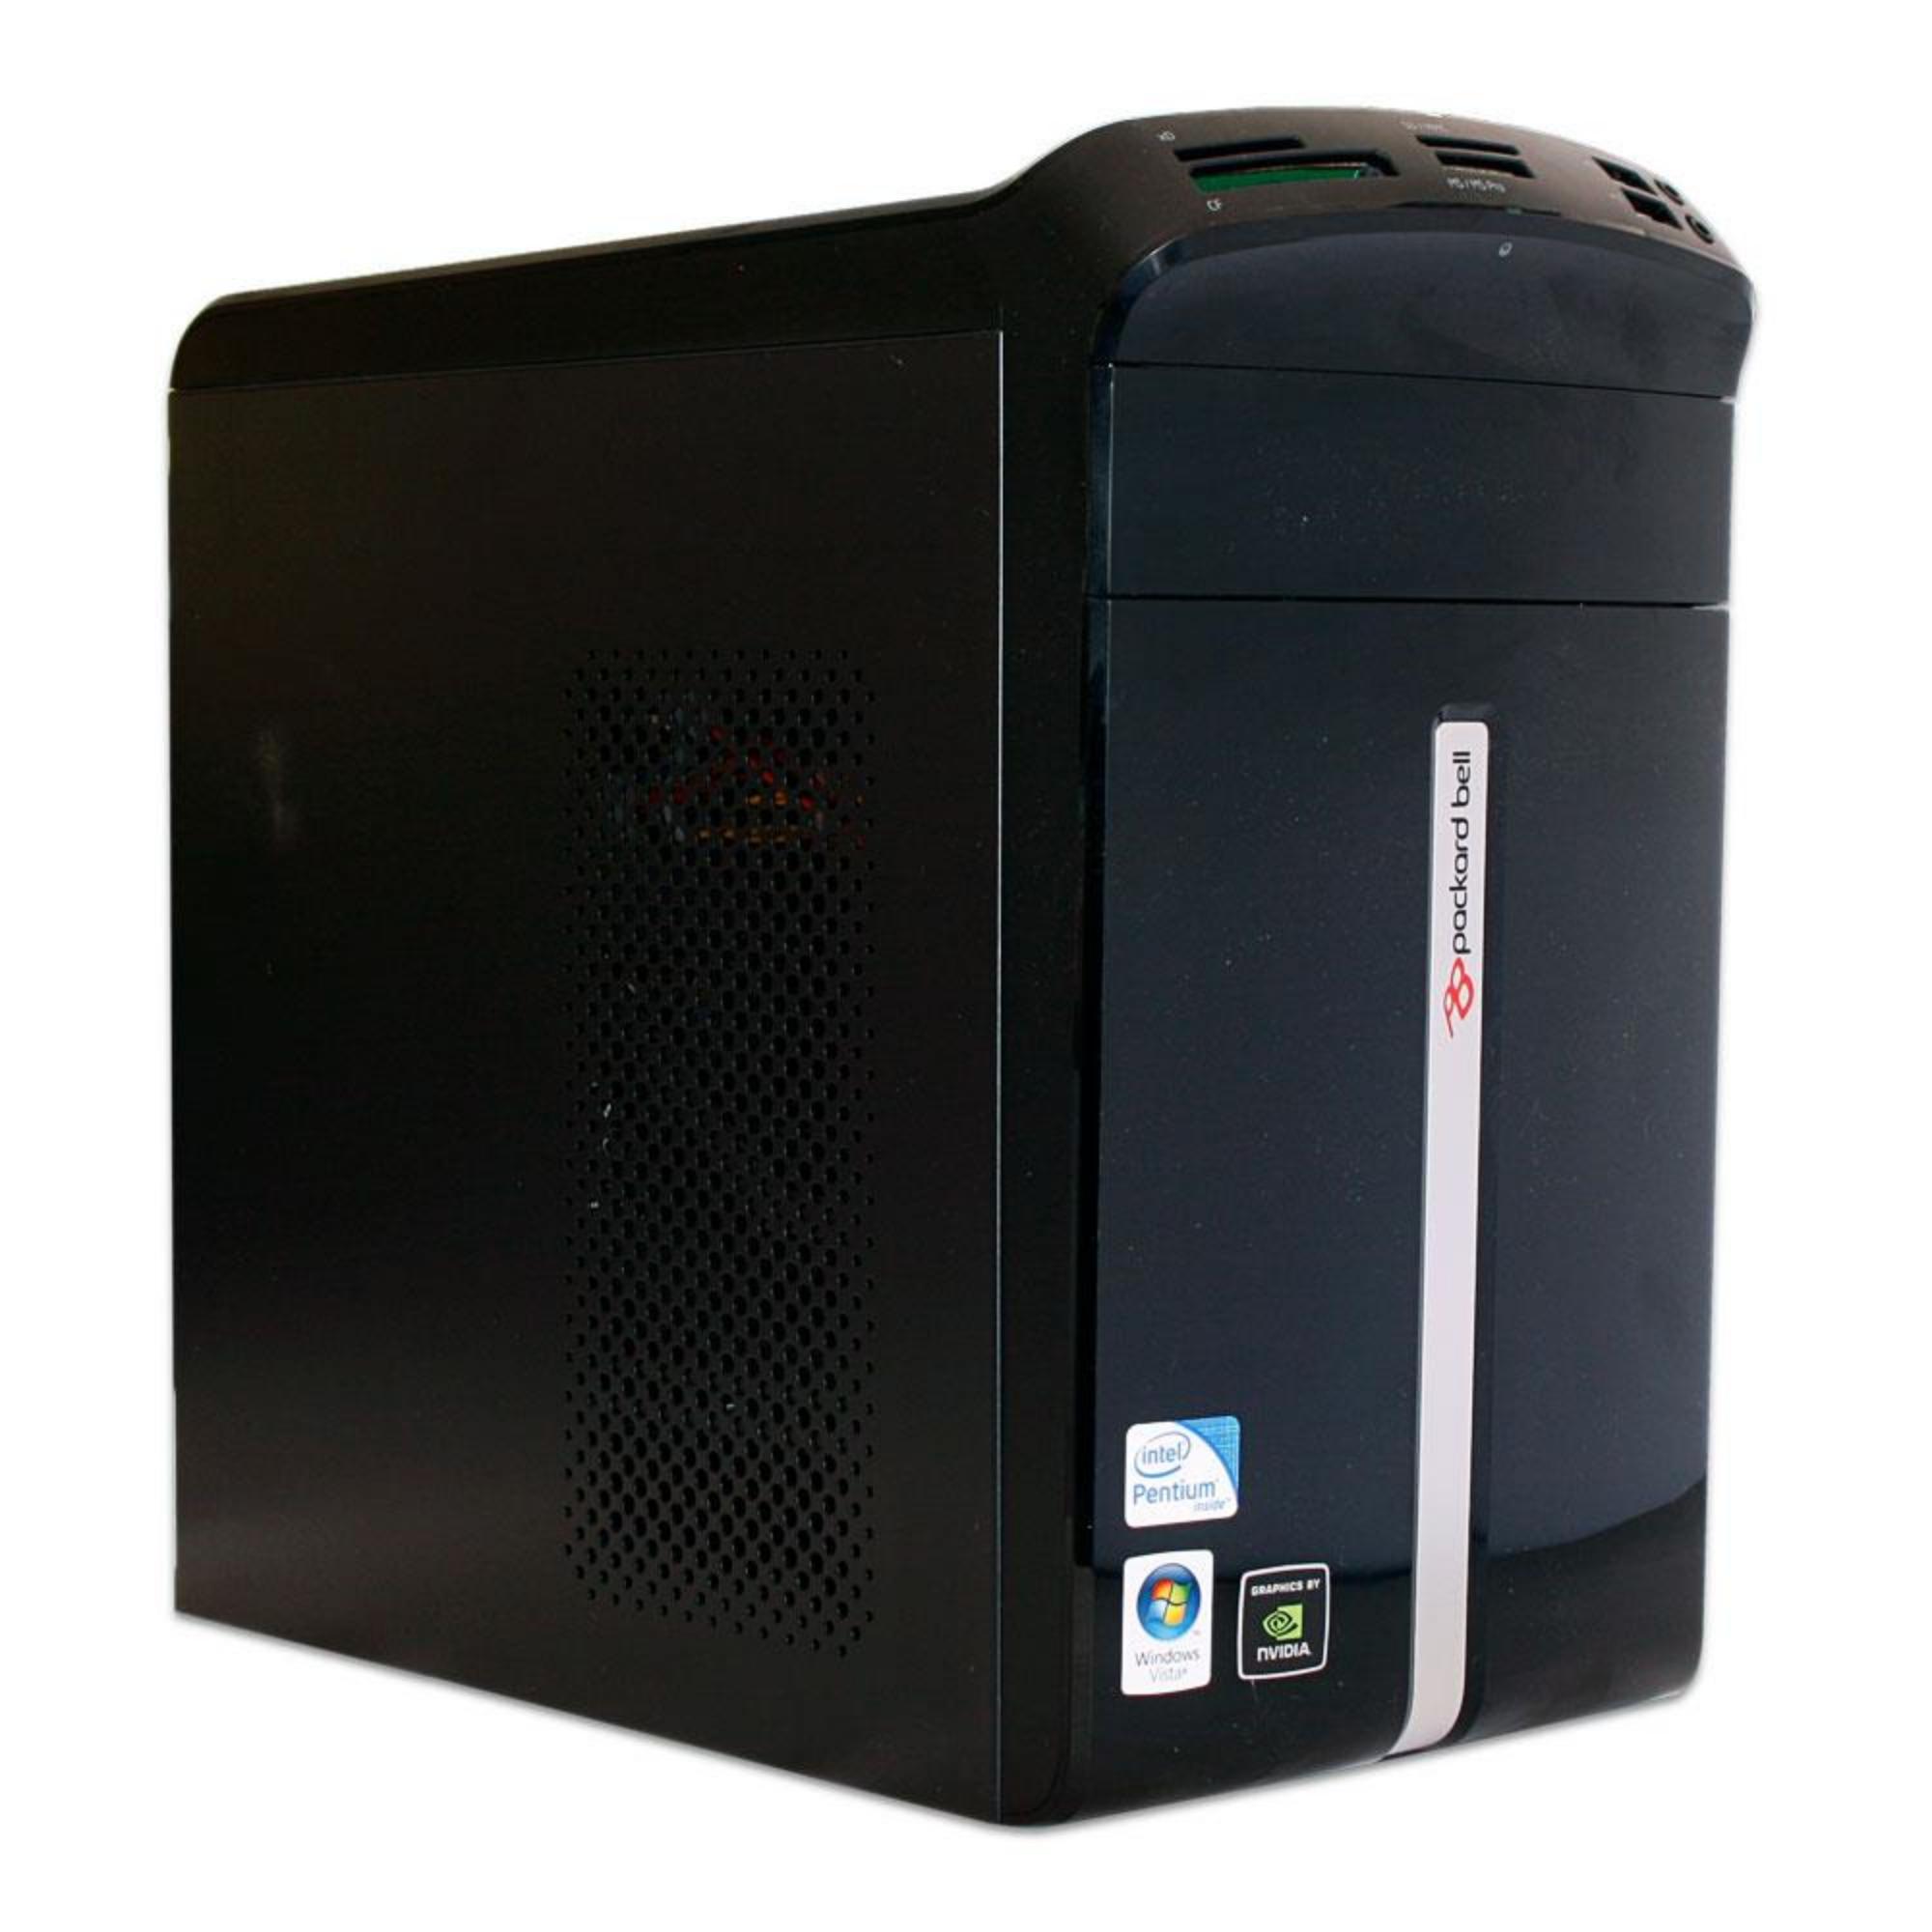 Tower – PACKARDBELL IMEDIA S1710 / INTEL E5200 / 250GB SSD / 4GB / NVIDIA620  / W10 – S1710-A<br><br><span STYLE="background:#39ac37;"><font color="white"> DISPONIBILE </font></span>